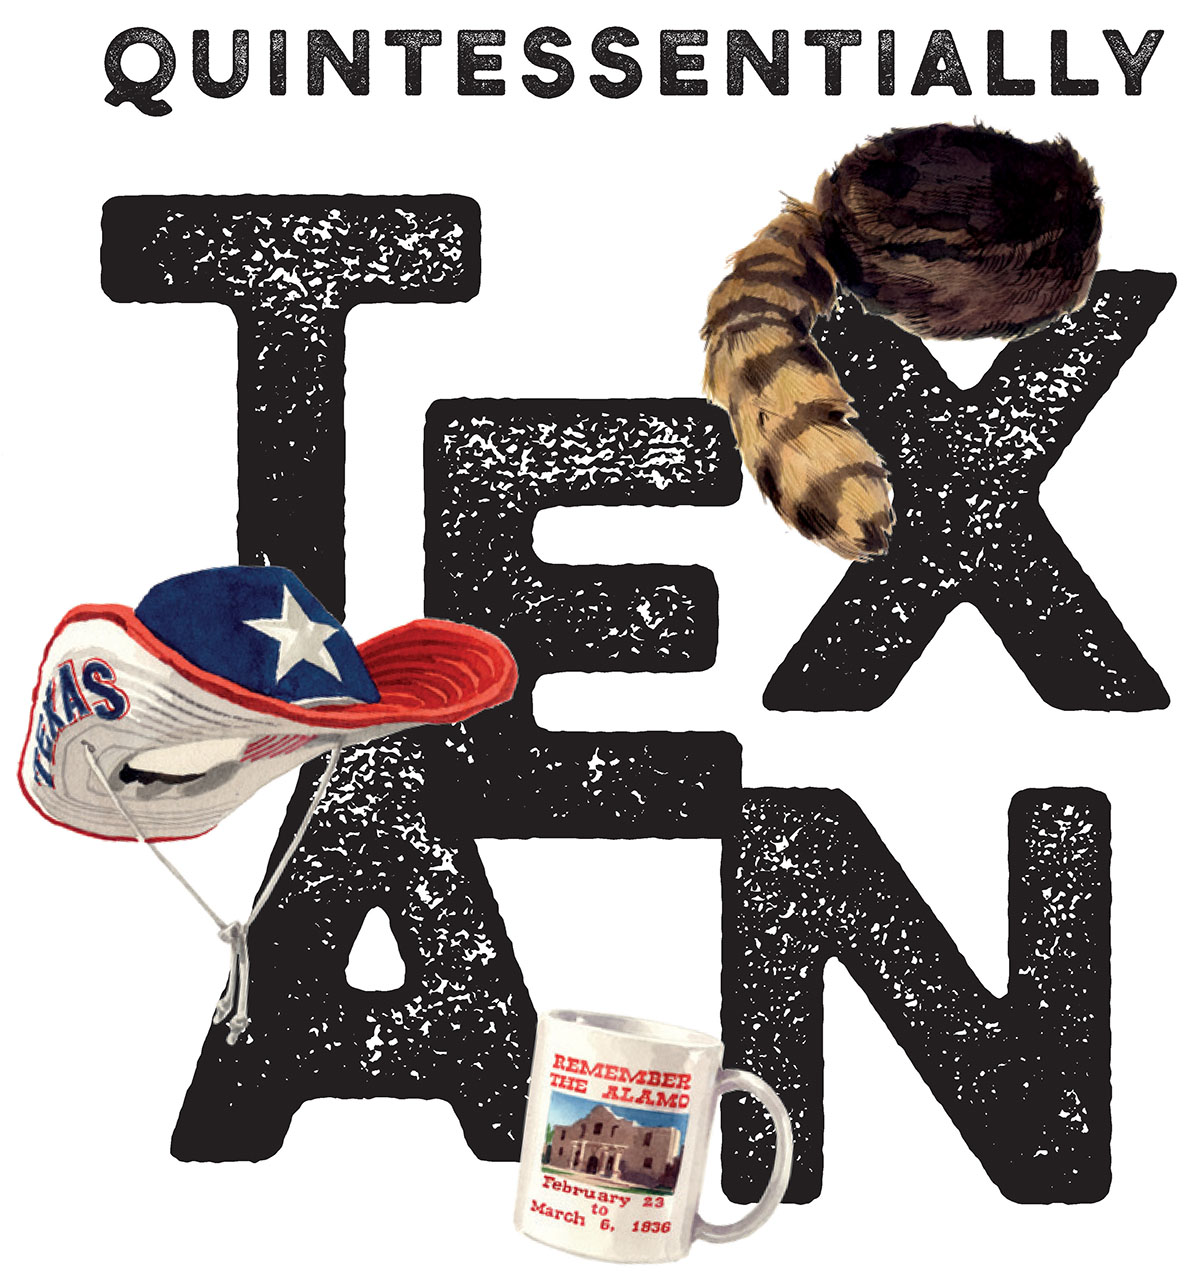 Quintessentially Texan with illustrations of a coonskin cap, Texas flag hat and Alamo coffee mug